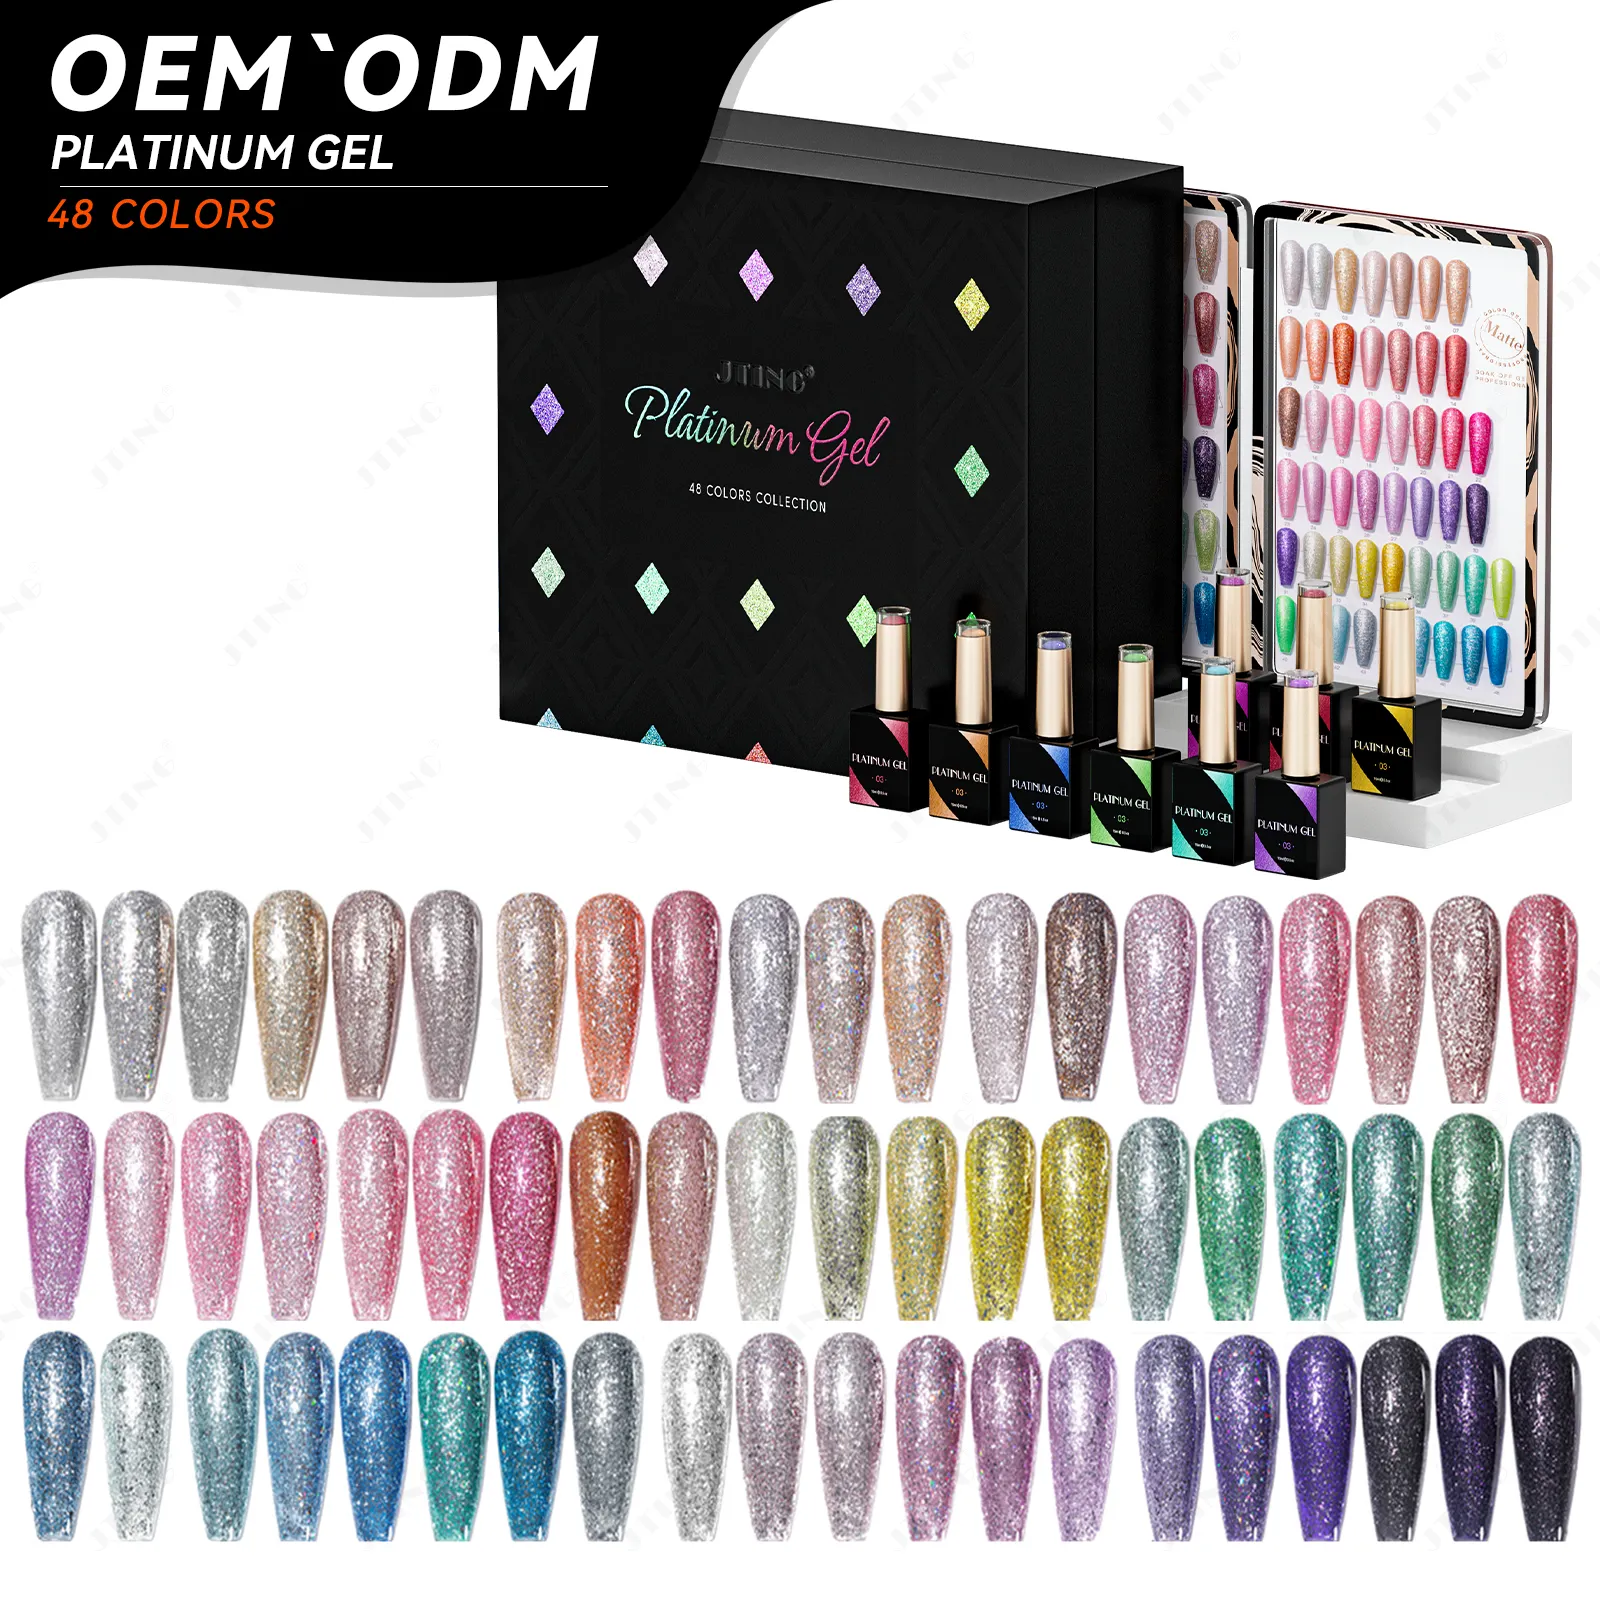 JTING free custom unique brand 48colors collection glitter platinum gel nail polish set box color book OEM Nail factory supplies